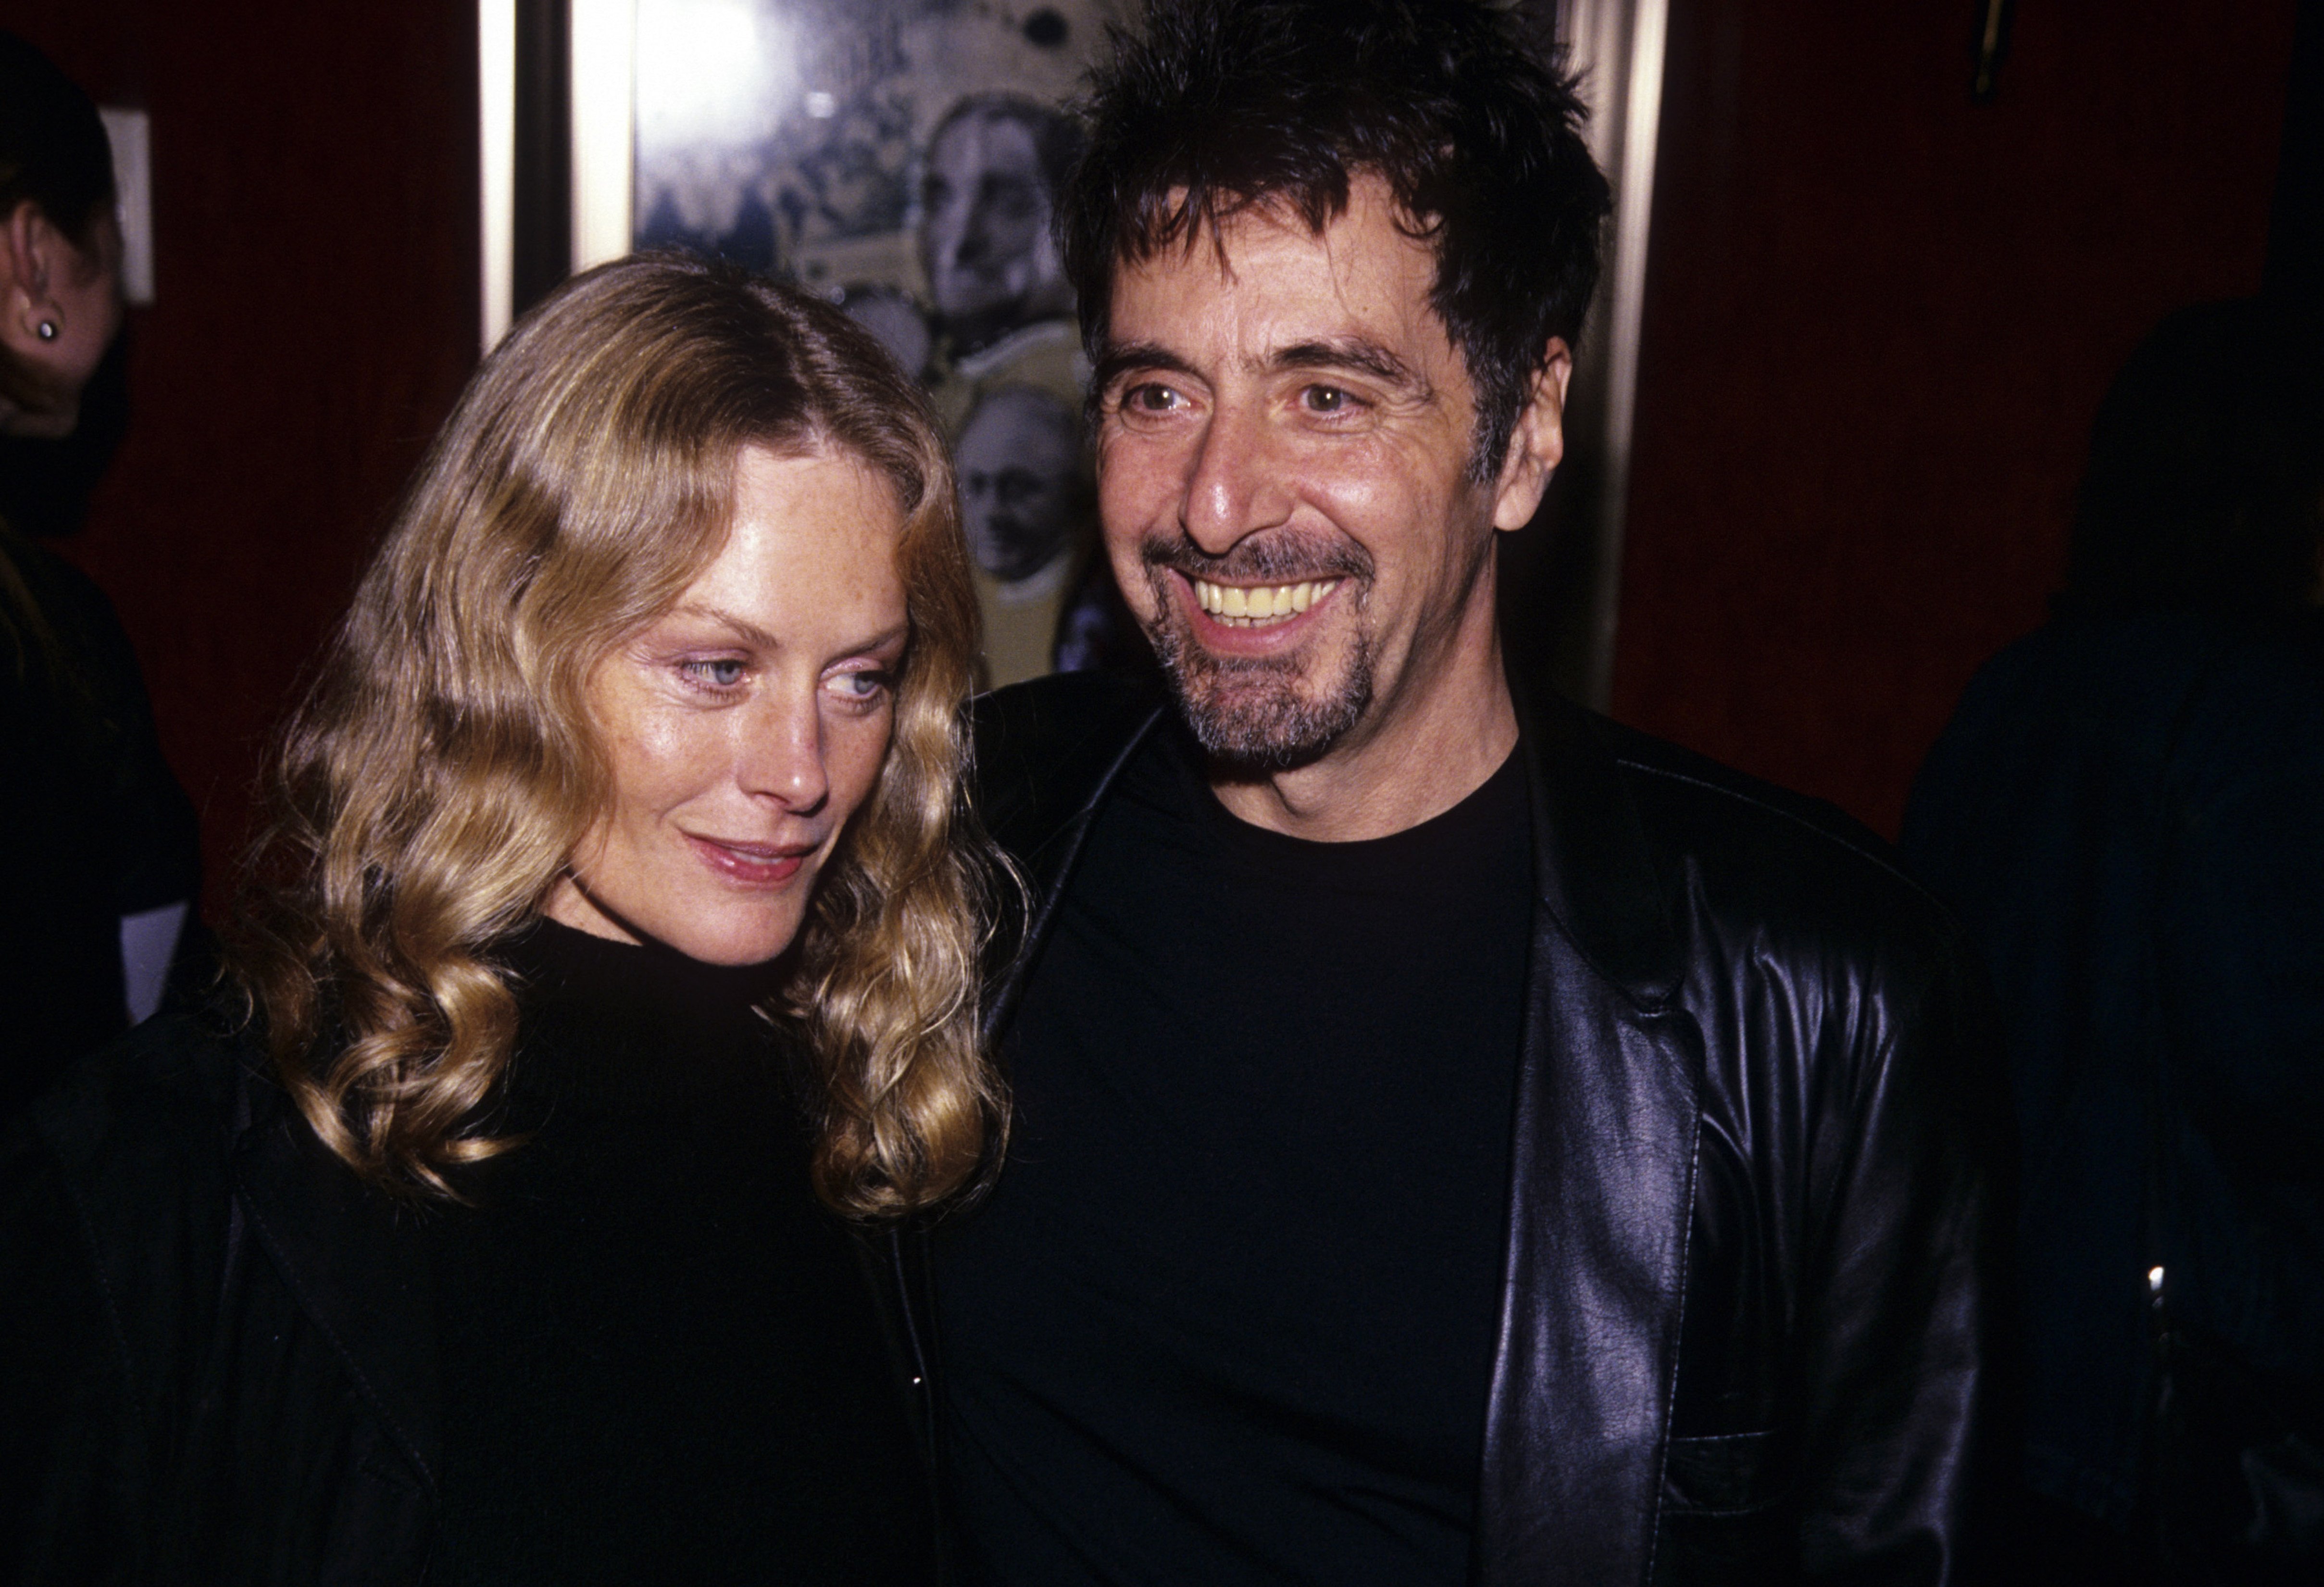 Beverly D'Angelo and Al Pacino at the premiere of "The Insider" in New York, November 1999 | Source: Getty Images